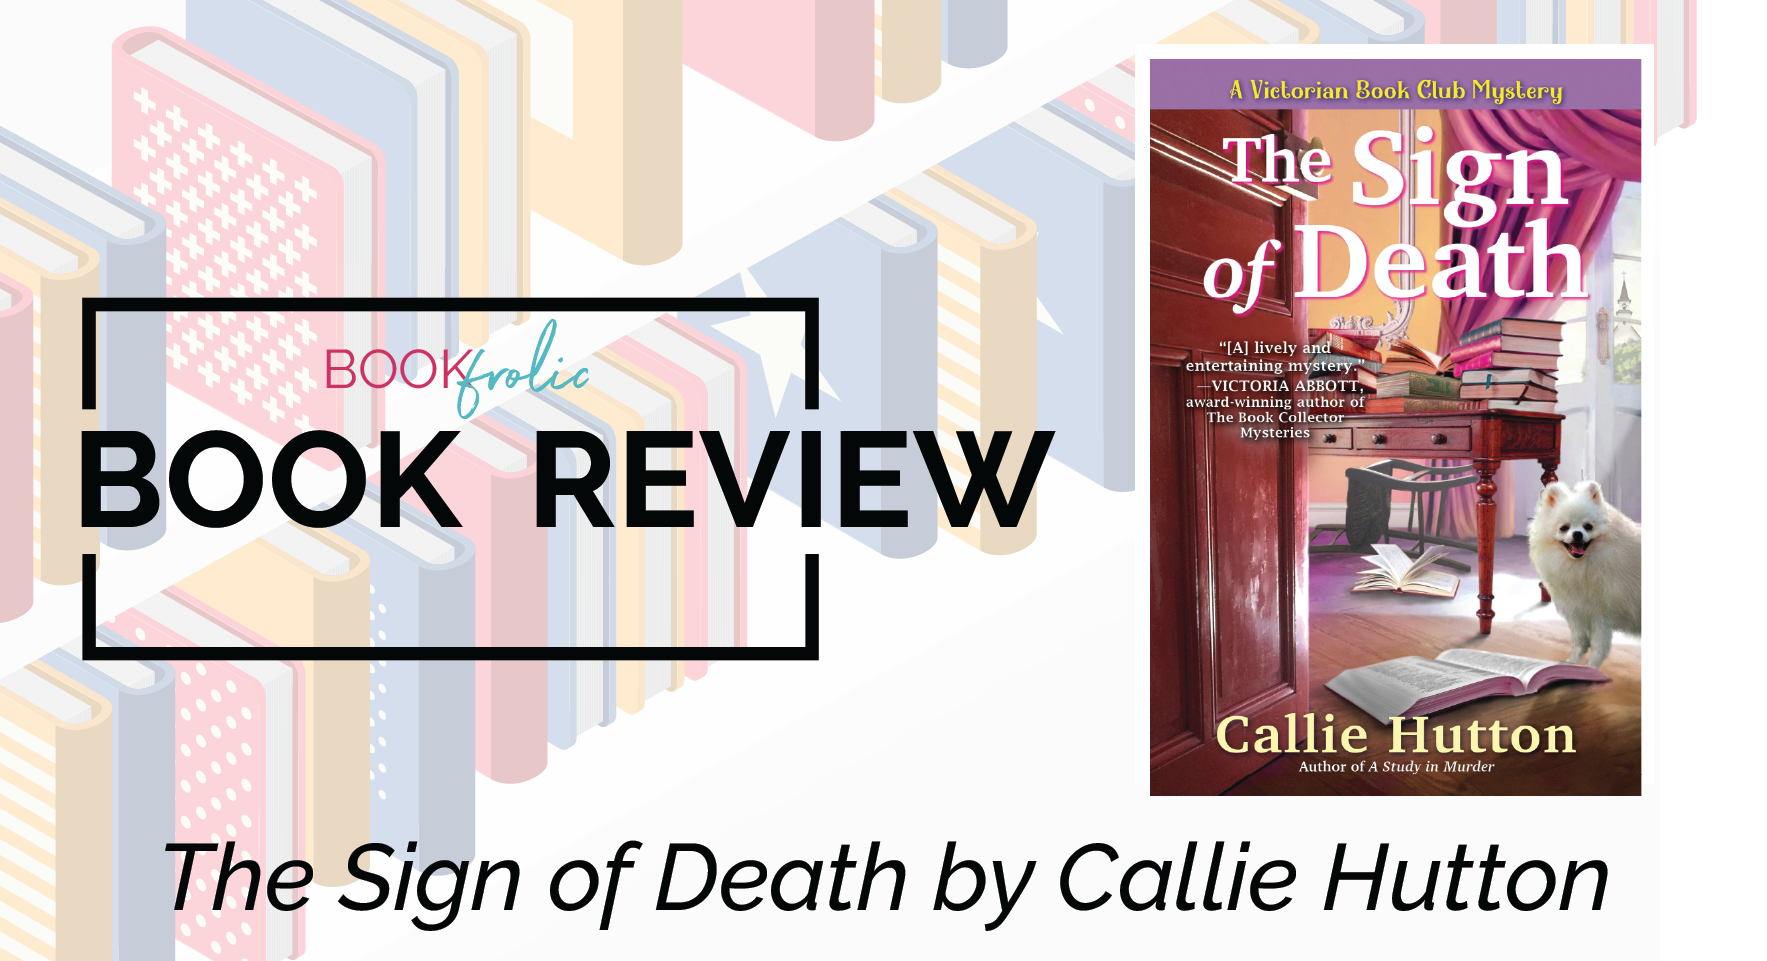 The Sign of Death by Callie Hutton